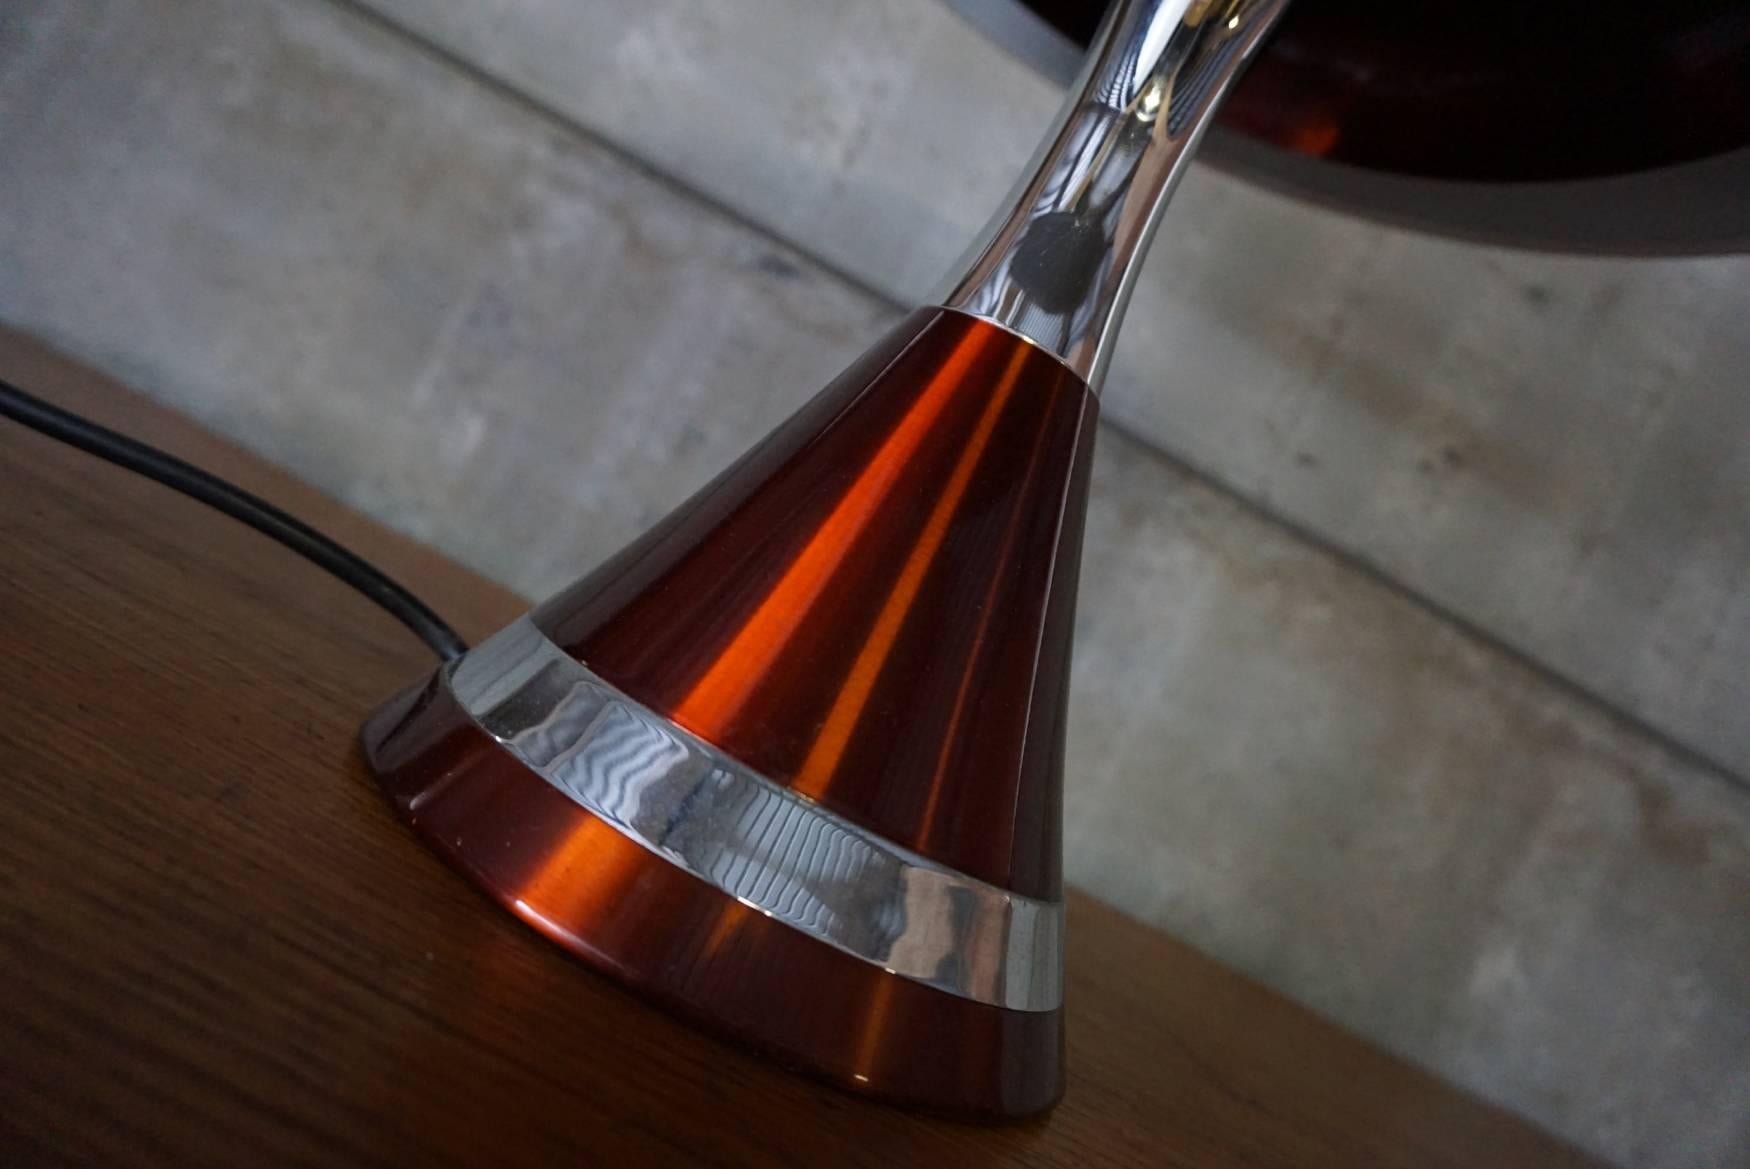 A space-age table lamp with a trumpet shaped base cast in bright orange or copper metallic. The outer shade is fitted on a white inner shade, trumpet shaped towards the bottom and open towards the top. The lamp features four bulb holders, one on top